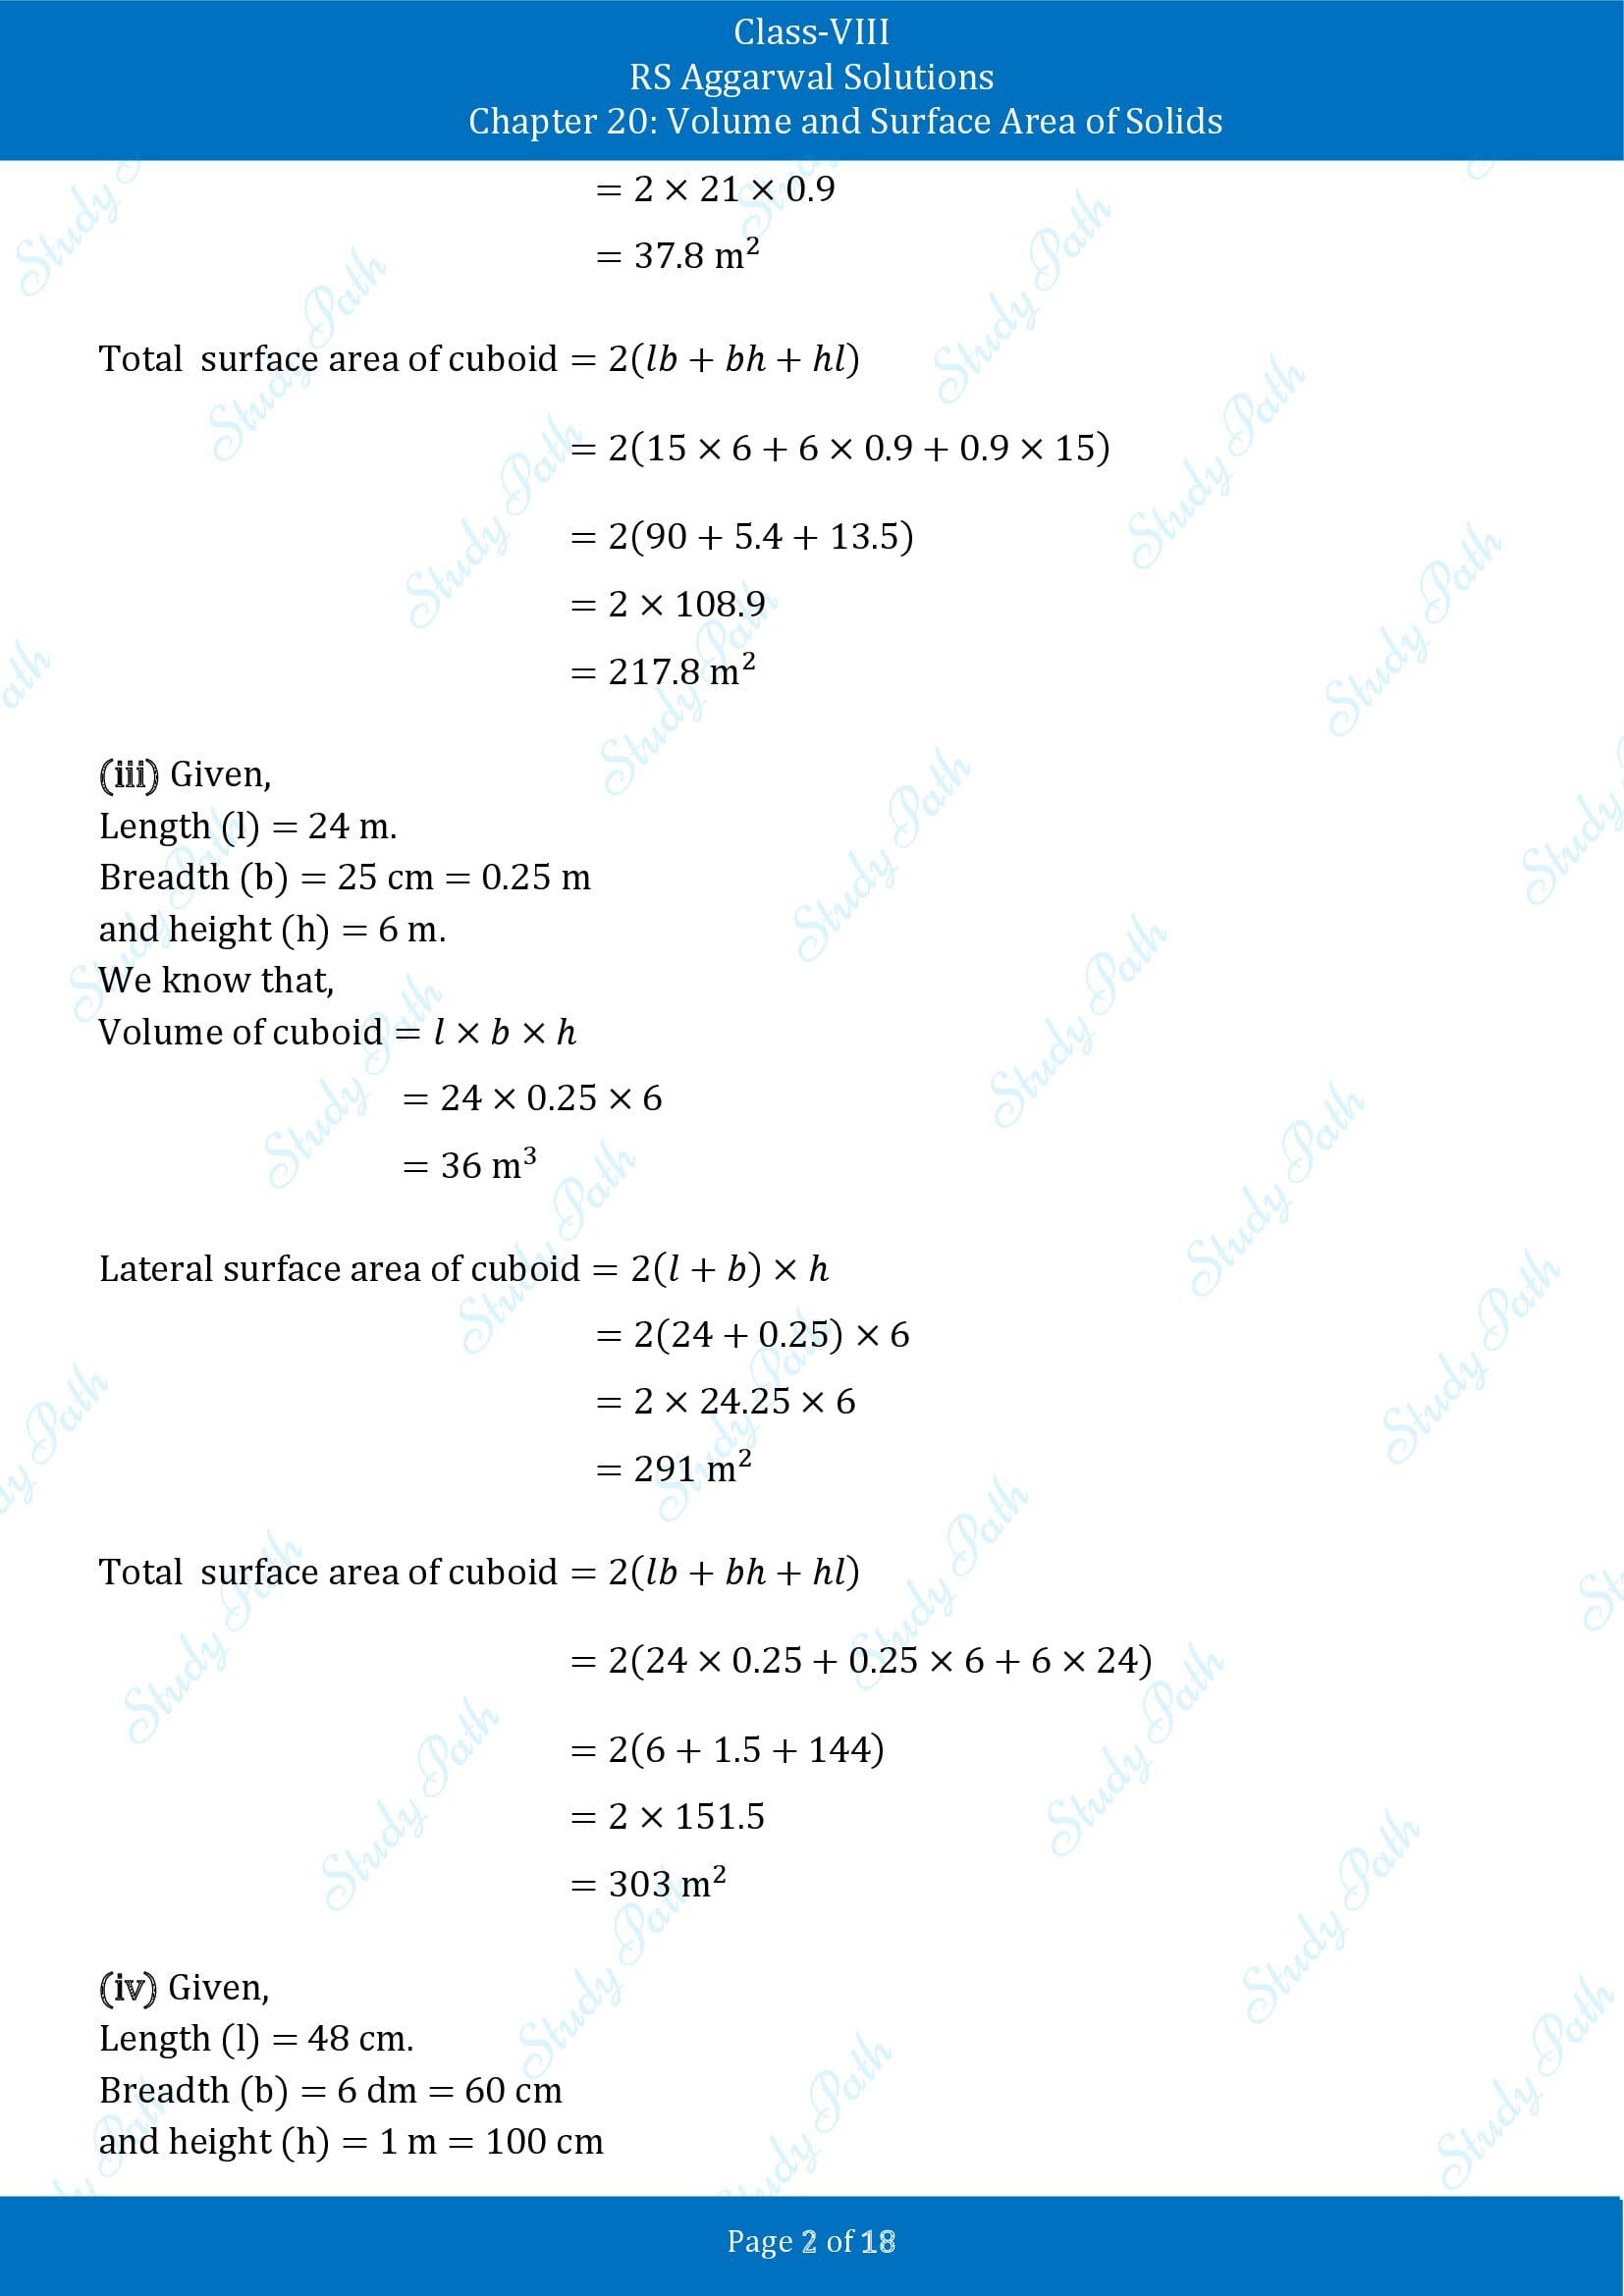 RS Aggarwal Solutions Class 8 Chapter 20 Volume and Surface Area of Solids Exercise 20A 00002